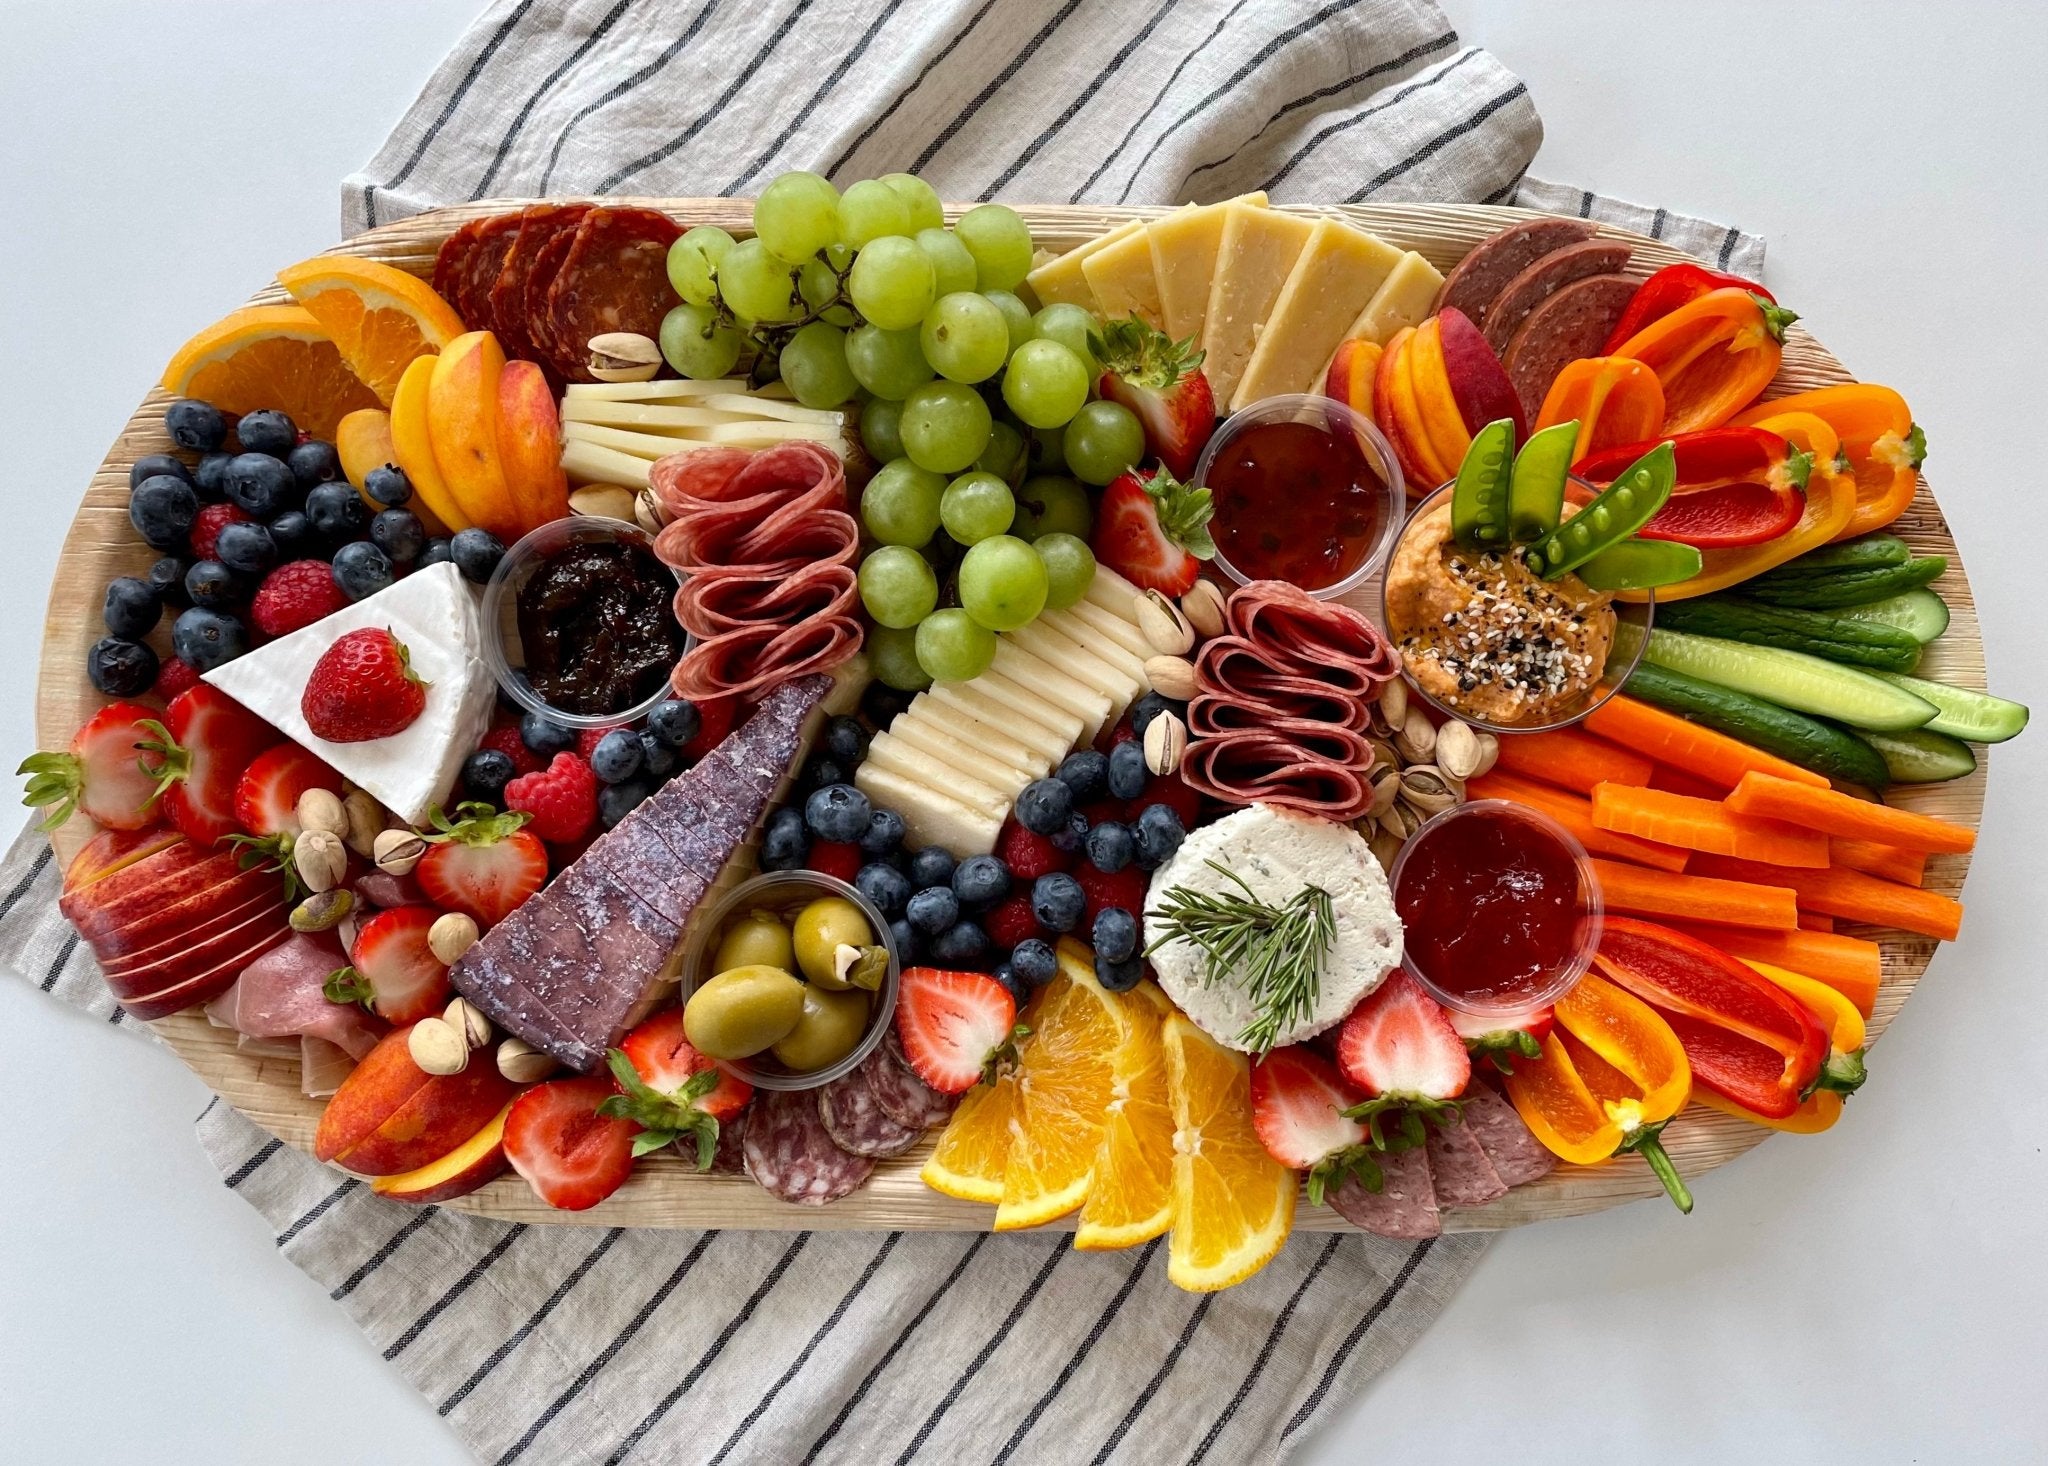 How to put together a charcuterie board: arranged aesthetically for a pleasing charcuterie board assembly